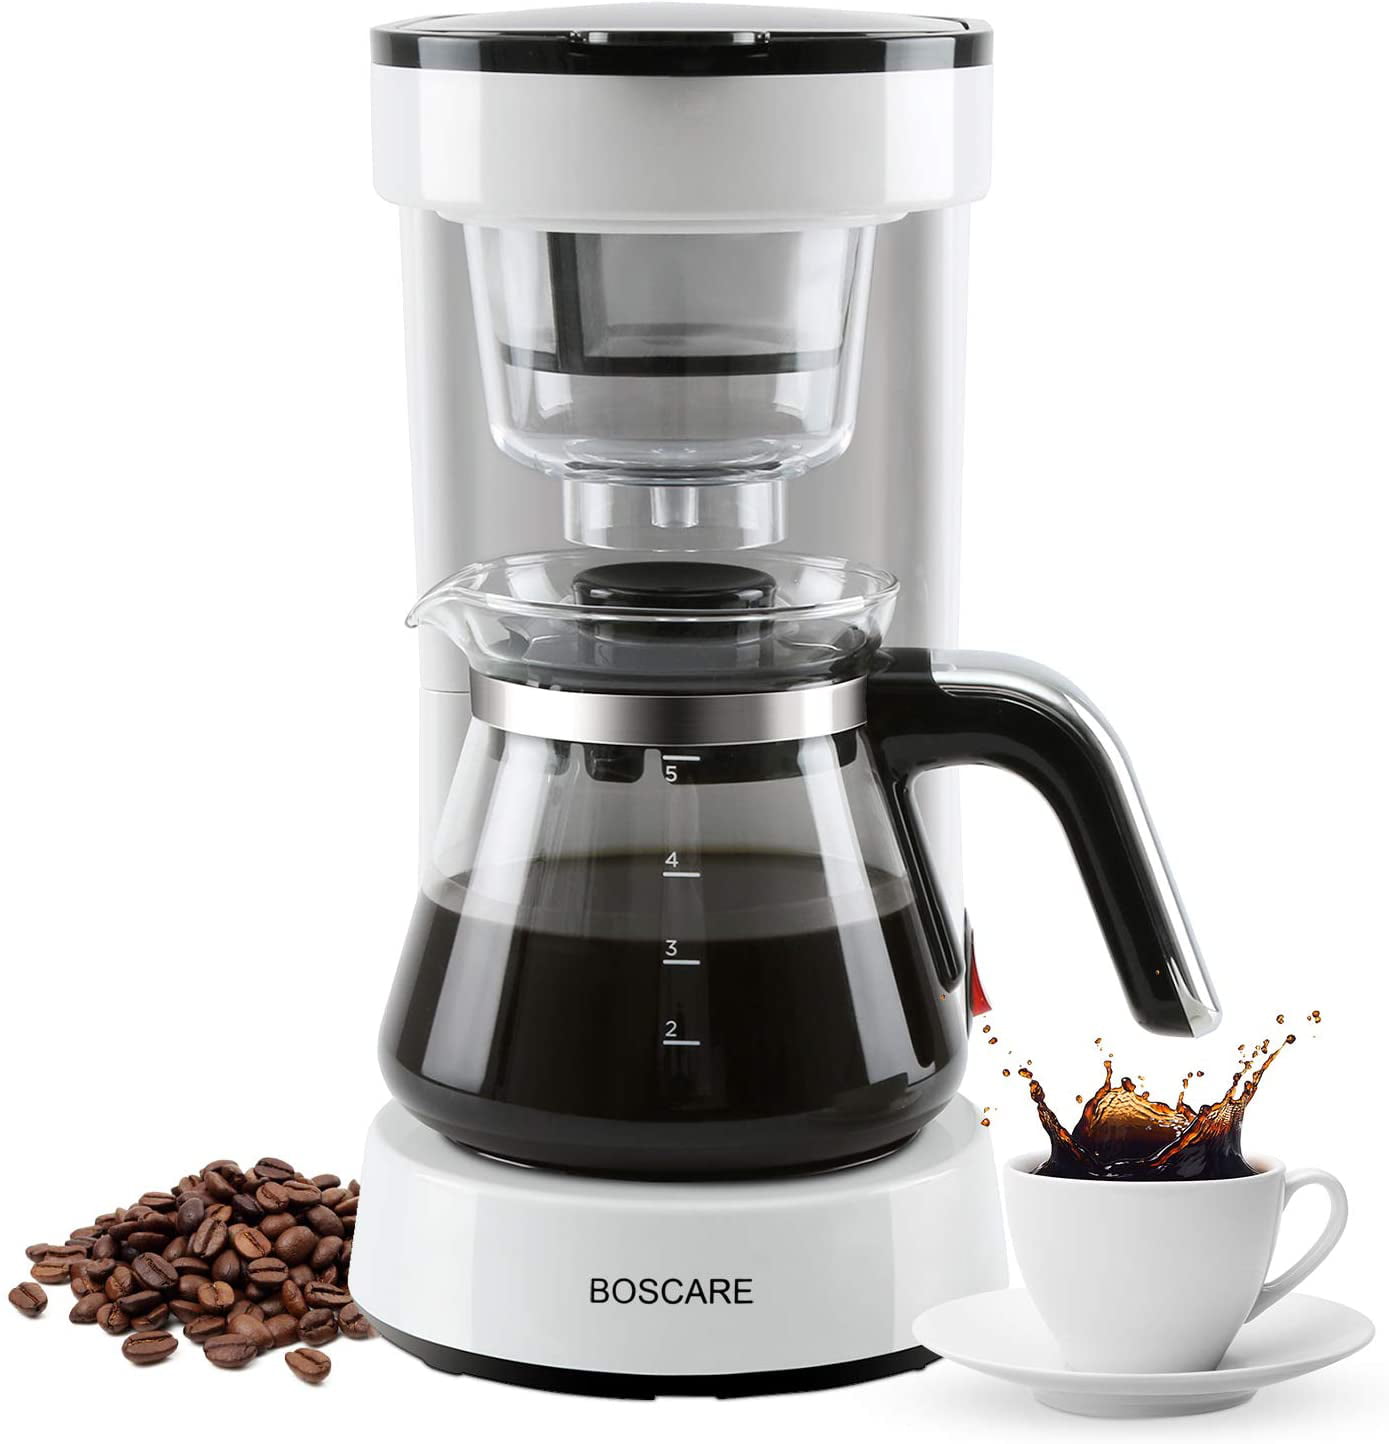   Basics 5 Cup Coffee Maker with Reusable Filter